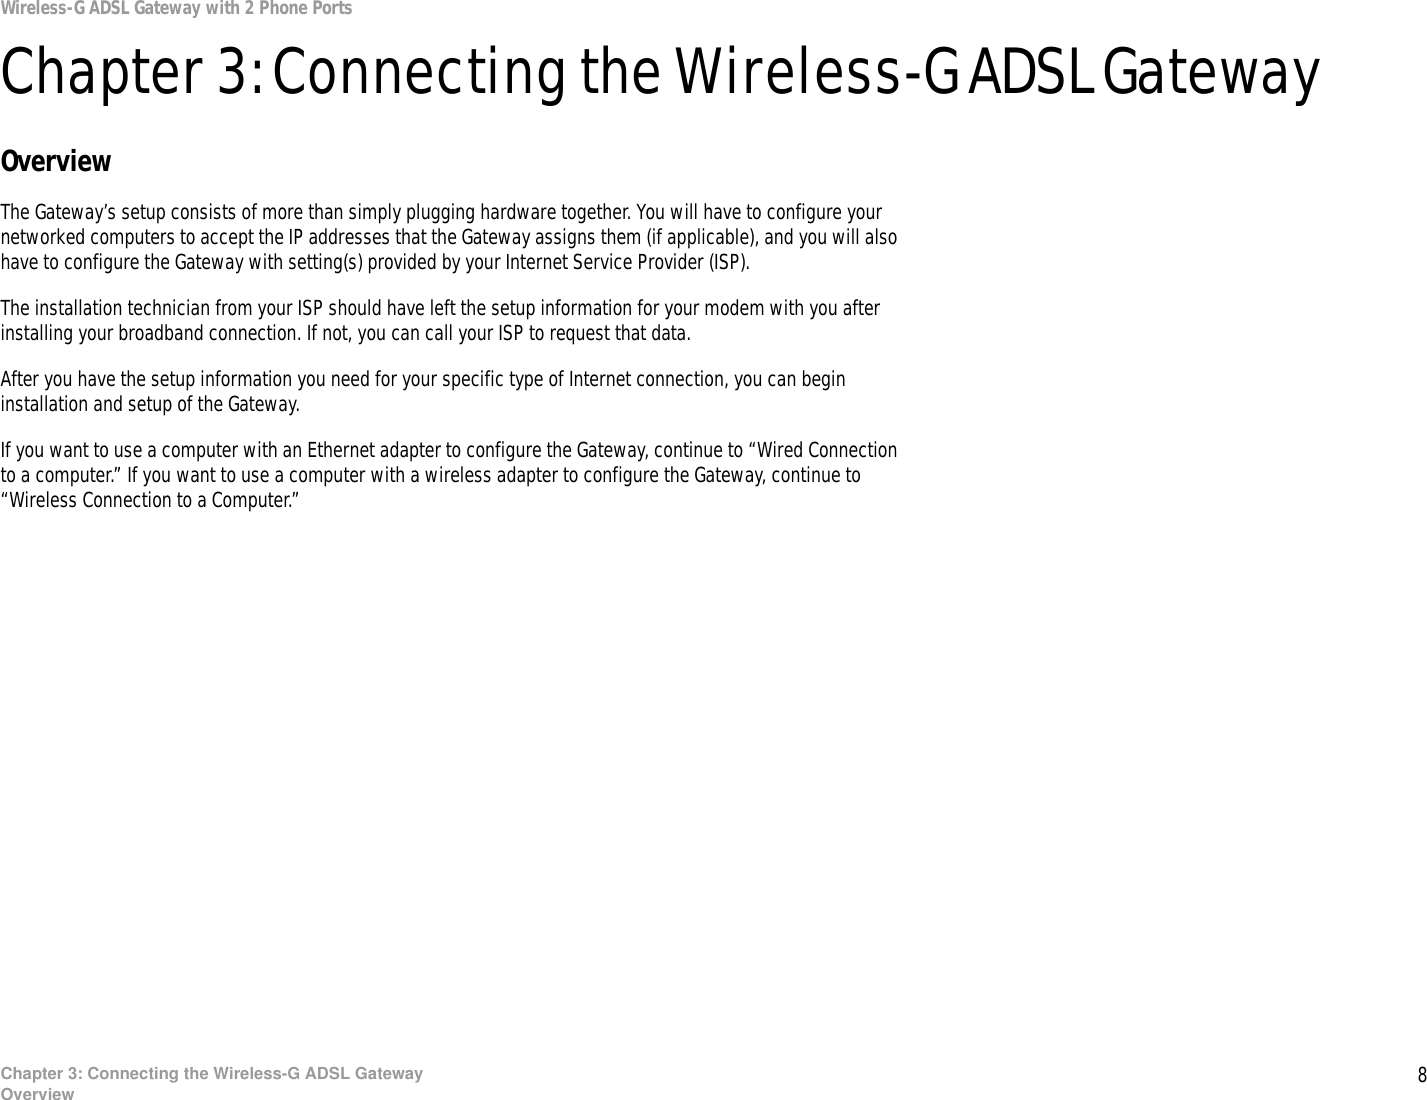 8Chapter 3: Connecting the Wireless-G ADSL GatewayOverviewWireless-G ADSL Gateway with 2 Phone PortsChapter 3: Connecting the Wireless-G ADSL GatewayOverviewThe Gateway’s setup consists of more than simply plugging hardware together. You will have to configure your networked computers to accept the IP addresses that the Gateway assigns them (if applicable), and you will also have to configure the Gateway with setting(s) provided by your Internet Service Provider (ISP).The installation technician from your ISP should have left the setup information for your modem with you after installing your broadband connection. If not, you can call your ISP to request that data. After you have the setup information you need for your specific type of Internet connection, you can begin installation and setup of the Gateway.If you want to use a computer with an Ethernet adapter to configure the Gateway, continue to “Wired Connection to a computer.” If you want to use a computer with a wireless adapter to configure the Gateway, continue to “Wireless Connection to a Computer.”  